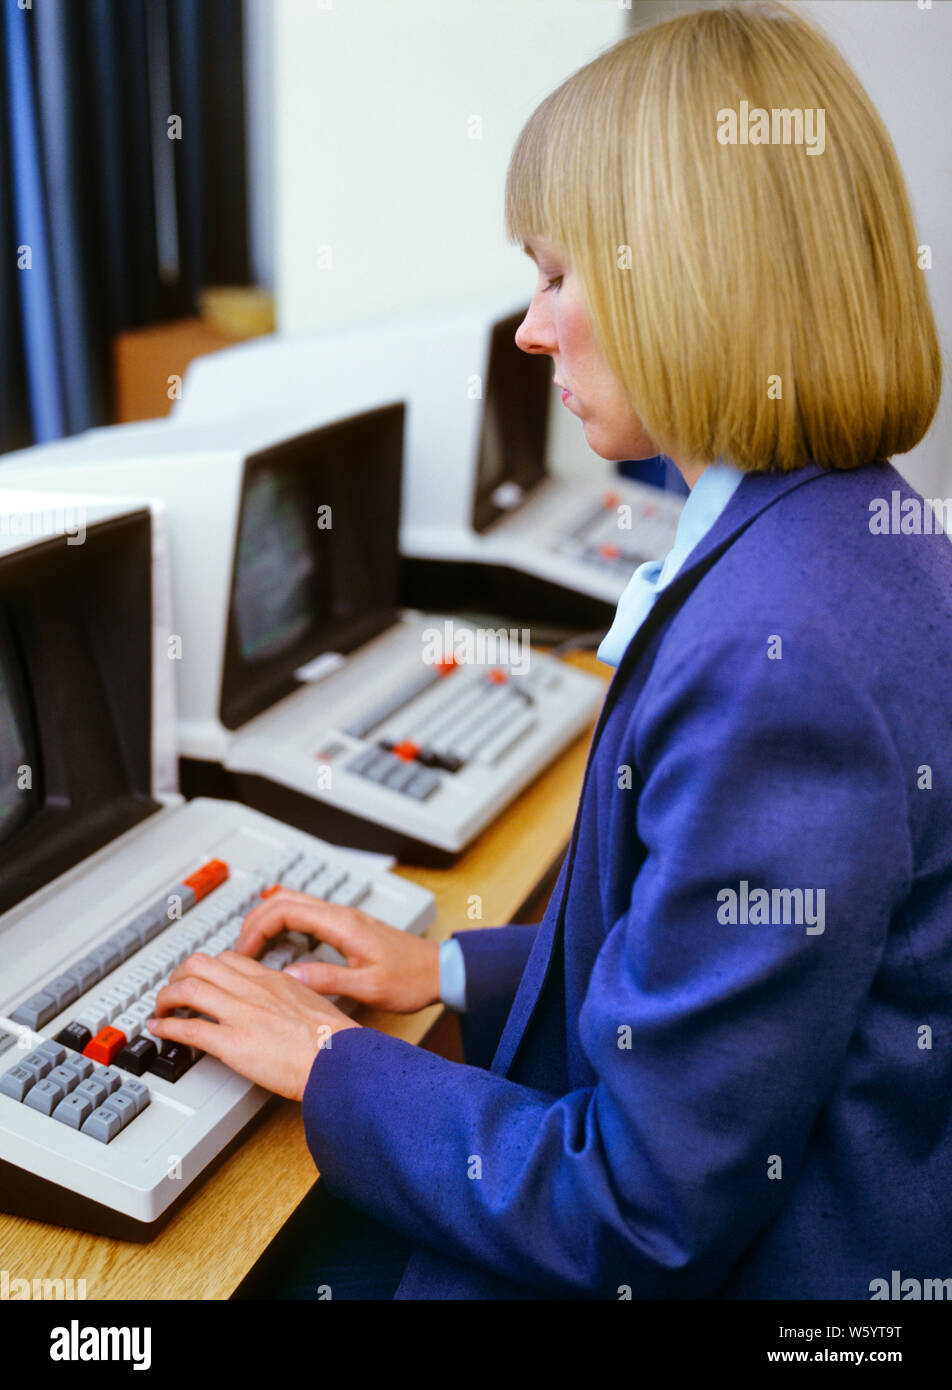 1980s BLOND WOMAN WEARING BLUE SUIT WORKING SITTING AT COMPUTER TERMINAL TYPING HANDS ON KEYBOARD - ko1301 PHT001 HARS HISTORY FEMALES JOBS UNITED STATES COPY SPACE HALF-LENGTH LADIES COMPUTERS PERSONS UNITED STATES OF AMERICA CONFIDENCE BUSINESSWOMAN NORTH AMERICA NORTH AMERICAN SKILL OCCUPATION SKILLS HIGH ANGLE EARLY TYPING NETWORKING HAIRSTYLE PROGRESS OPPORTUNITY NYC OCCUPATIONS HIGH TECH CONNECTION HARDWARE NEW YORK CITIES STYLISH BUSINESSWOMEN NEW YORK CITY TEXAS INSTRUMENTS BOB HIGH-TECH MID-ADULT MID-ADULT MAN MID-ADULT WOMAN PAGEBOY TERMINAL CAUCASIAN ETHNICITY OLD FASHIONED Stock Photo